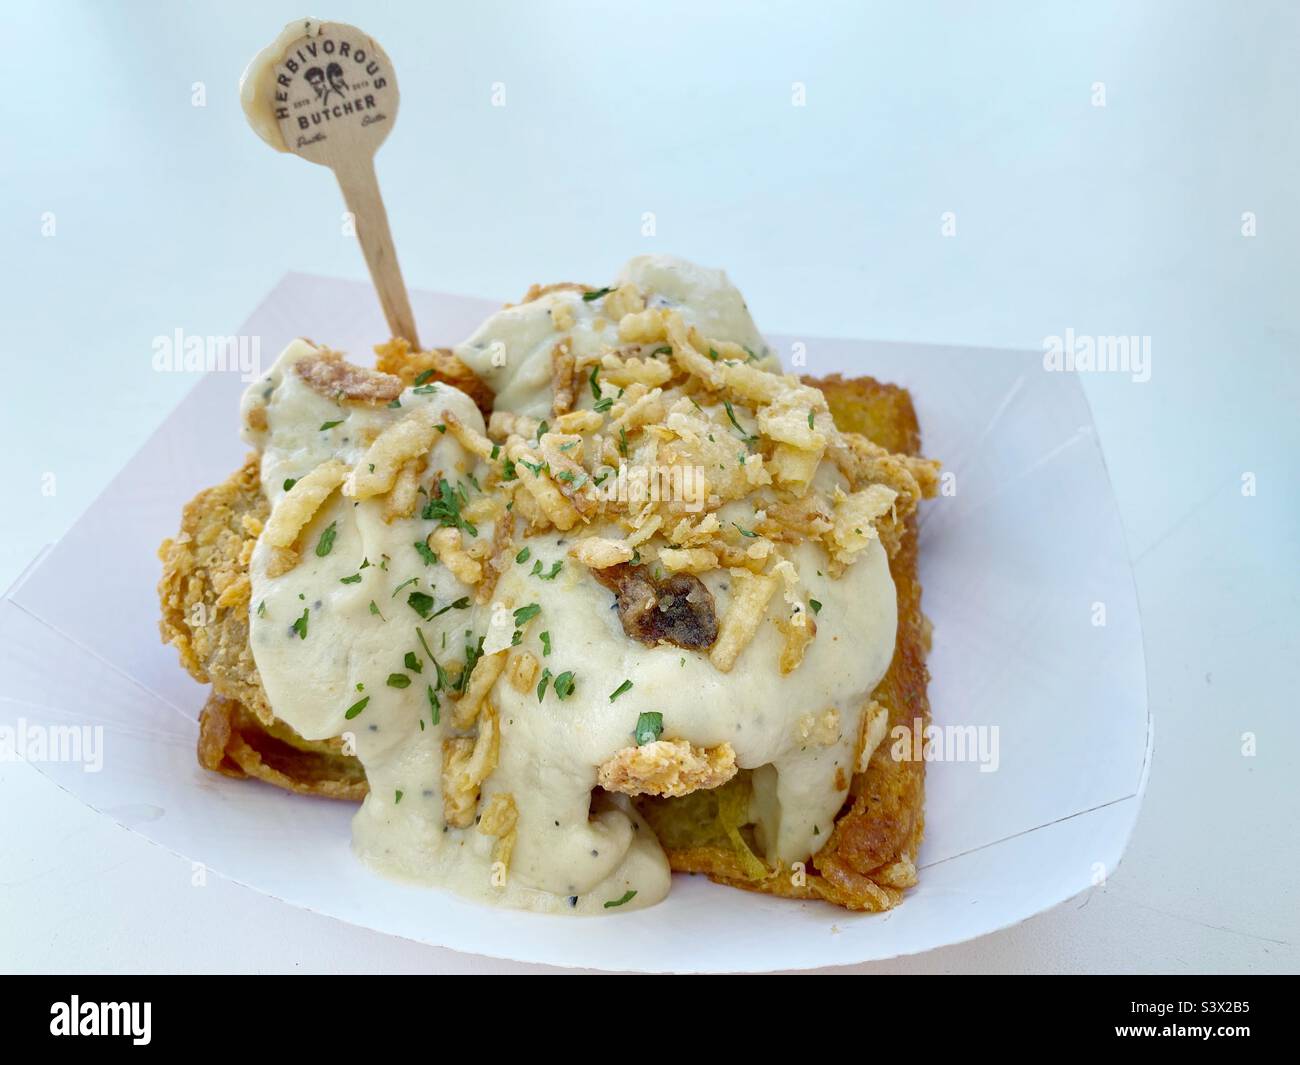 Vegan chicken with gravy on toast made by The Herbivorous Butcher in Minneapolis, Minnesota, at their Minnesota State Fair booth. Stock Photo